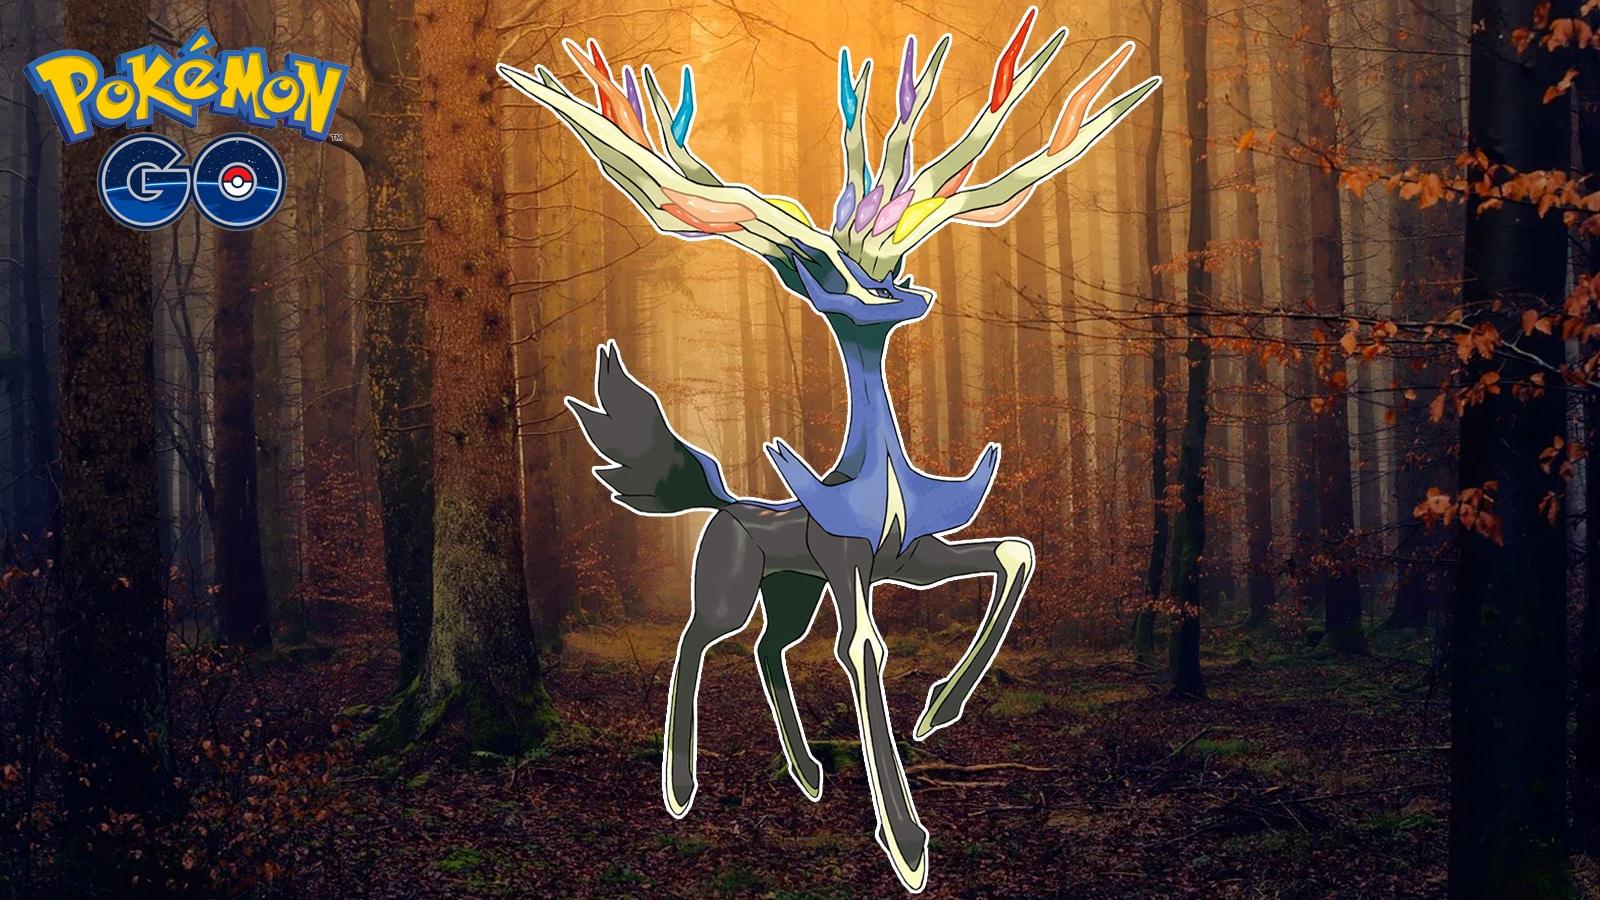 ✨️Shiny Xerneas after 46 raids lol but now I got alot of candies for it  atleast! : r/PokemonGOValor